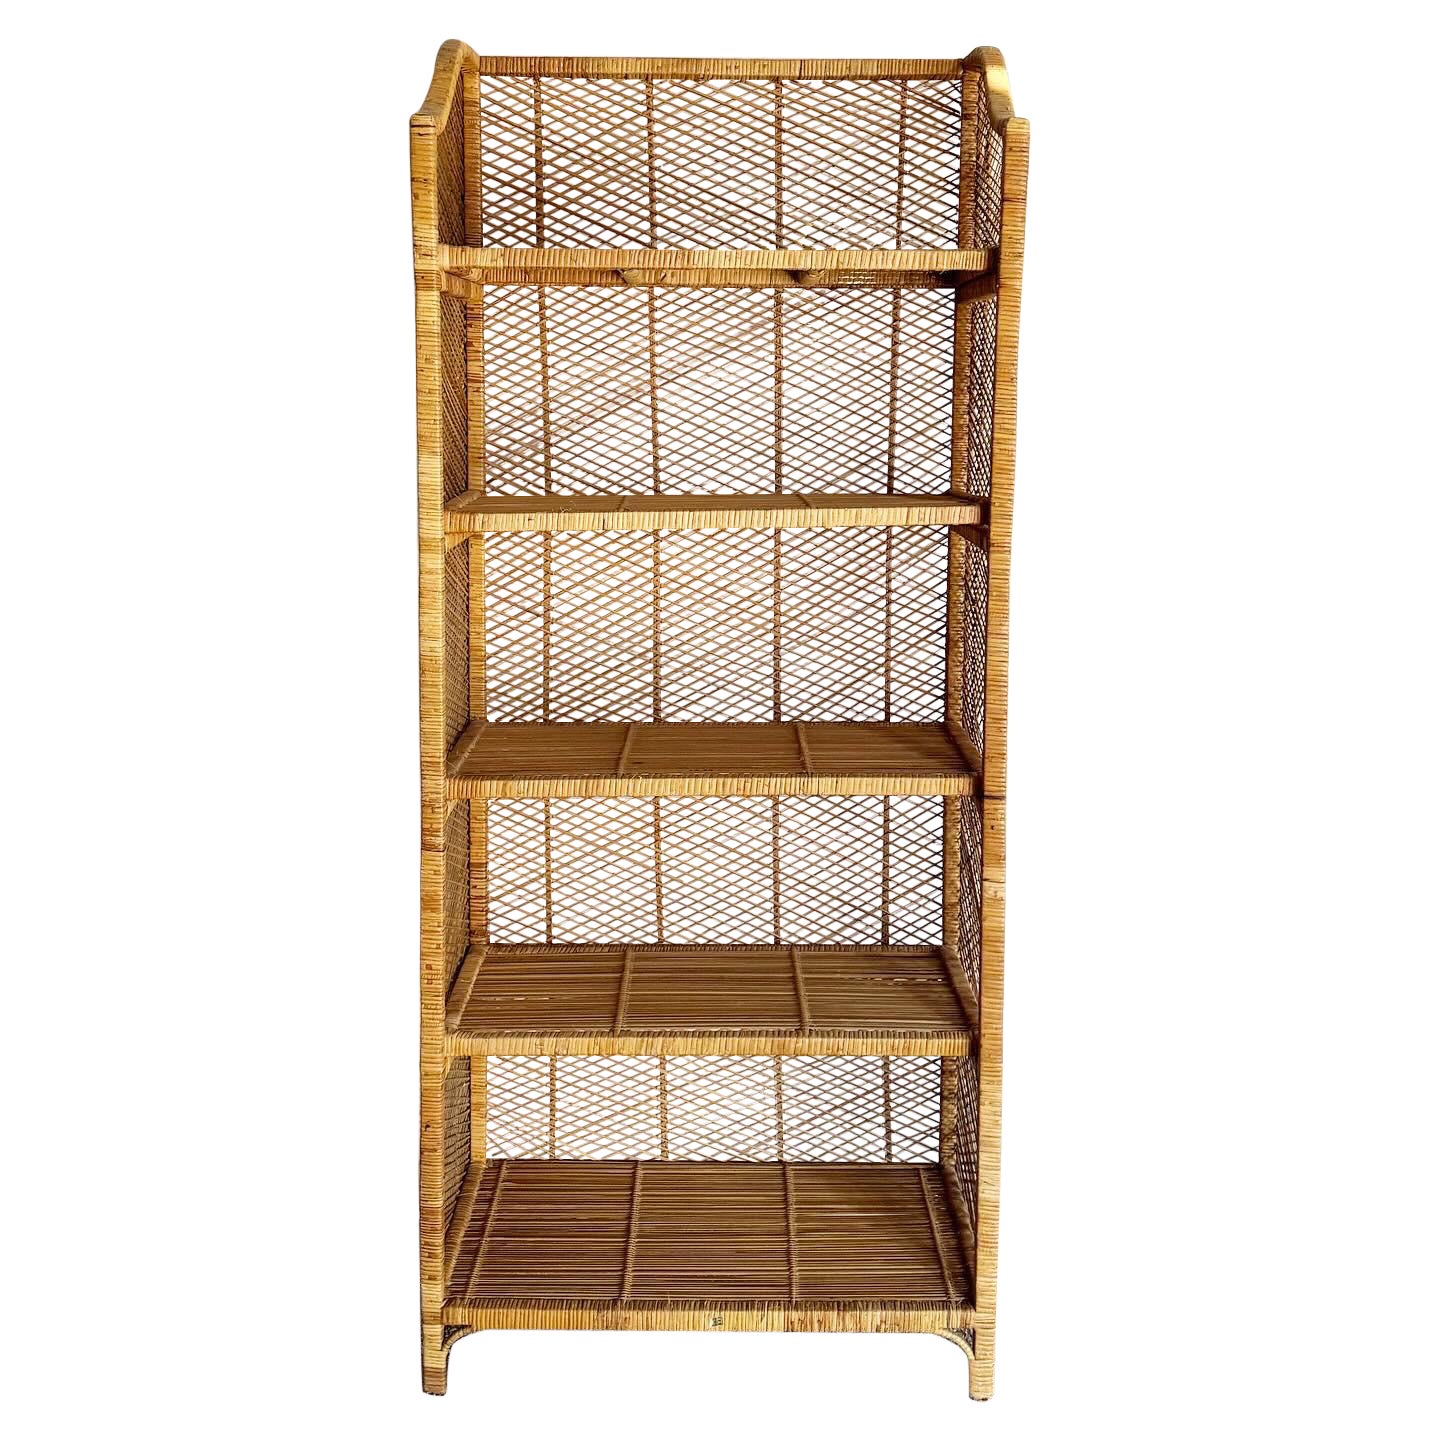 Boho Chic Wicker Rattan Etagere With 4 Removable Shelves For Sale